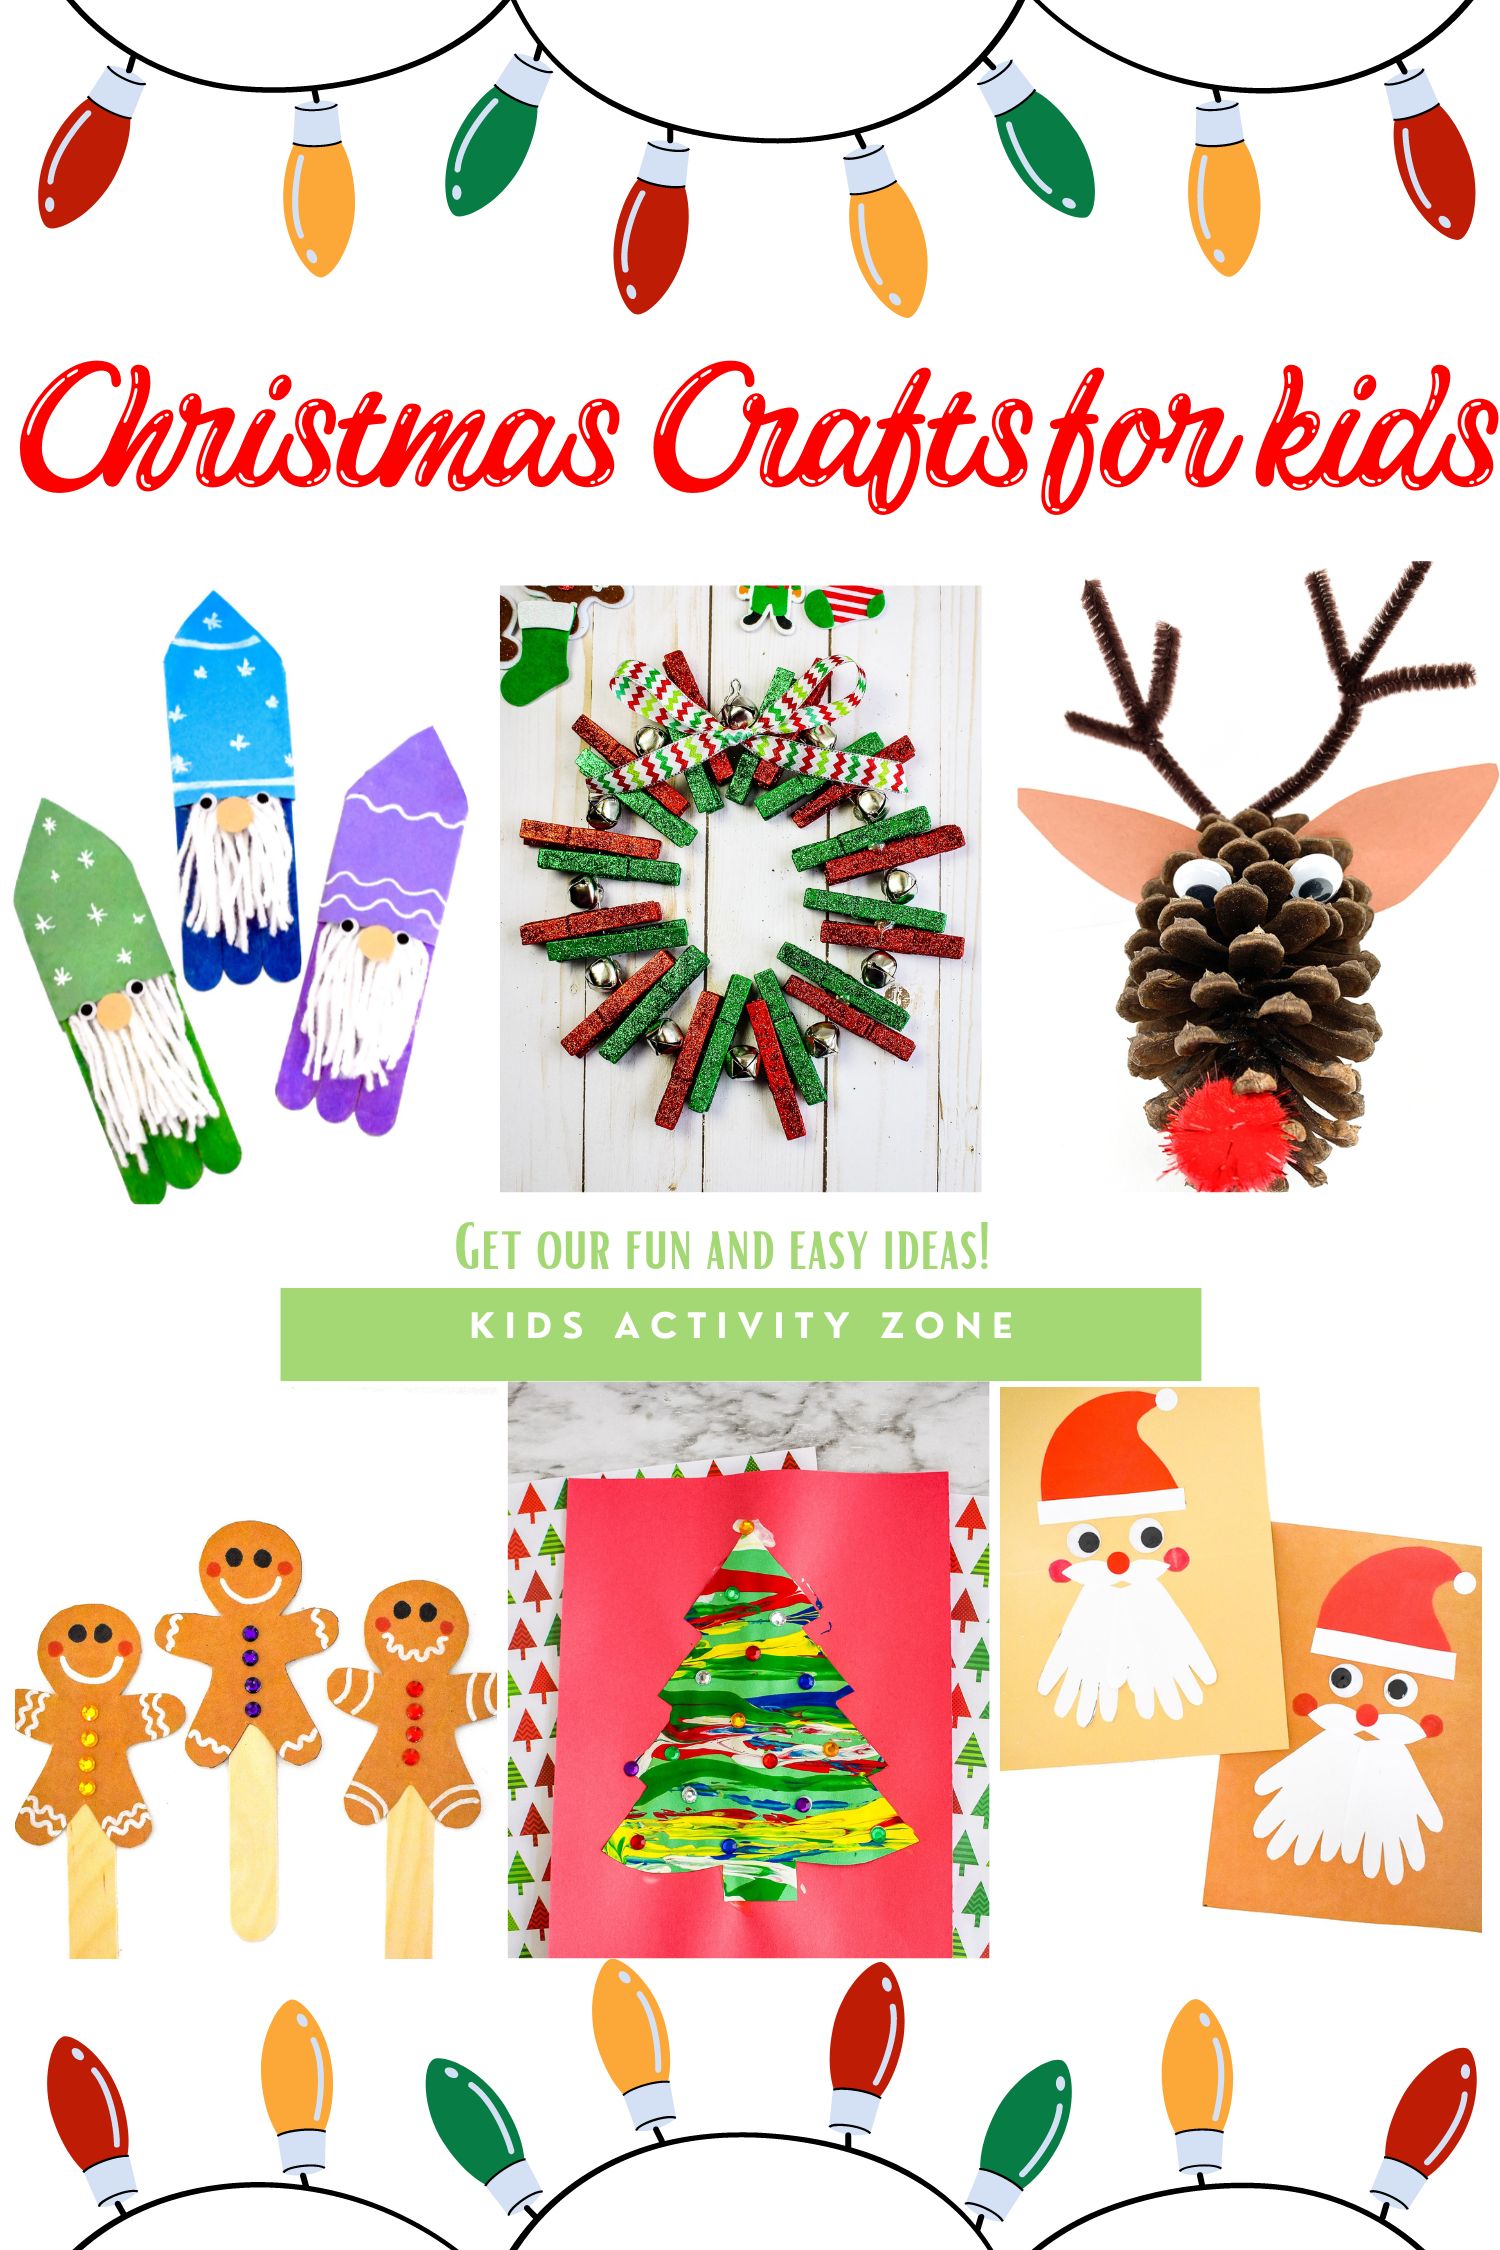 Christmas Crafts for Kids to make during the holiday season! These easy Christmas Crafts for kids are the perfect way to get into the Christmas spirit. We have gathered 35+ of our favorite Christmas Crafts that are perfect for doing with the kids during the holidays!